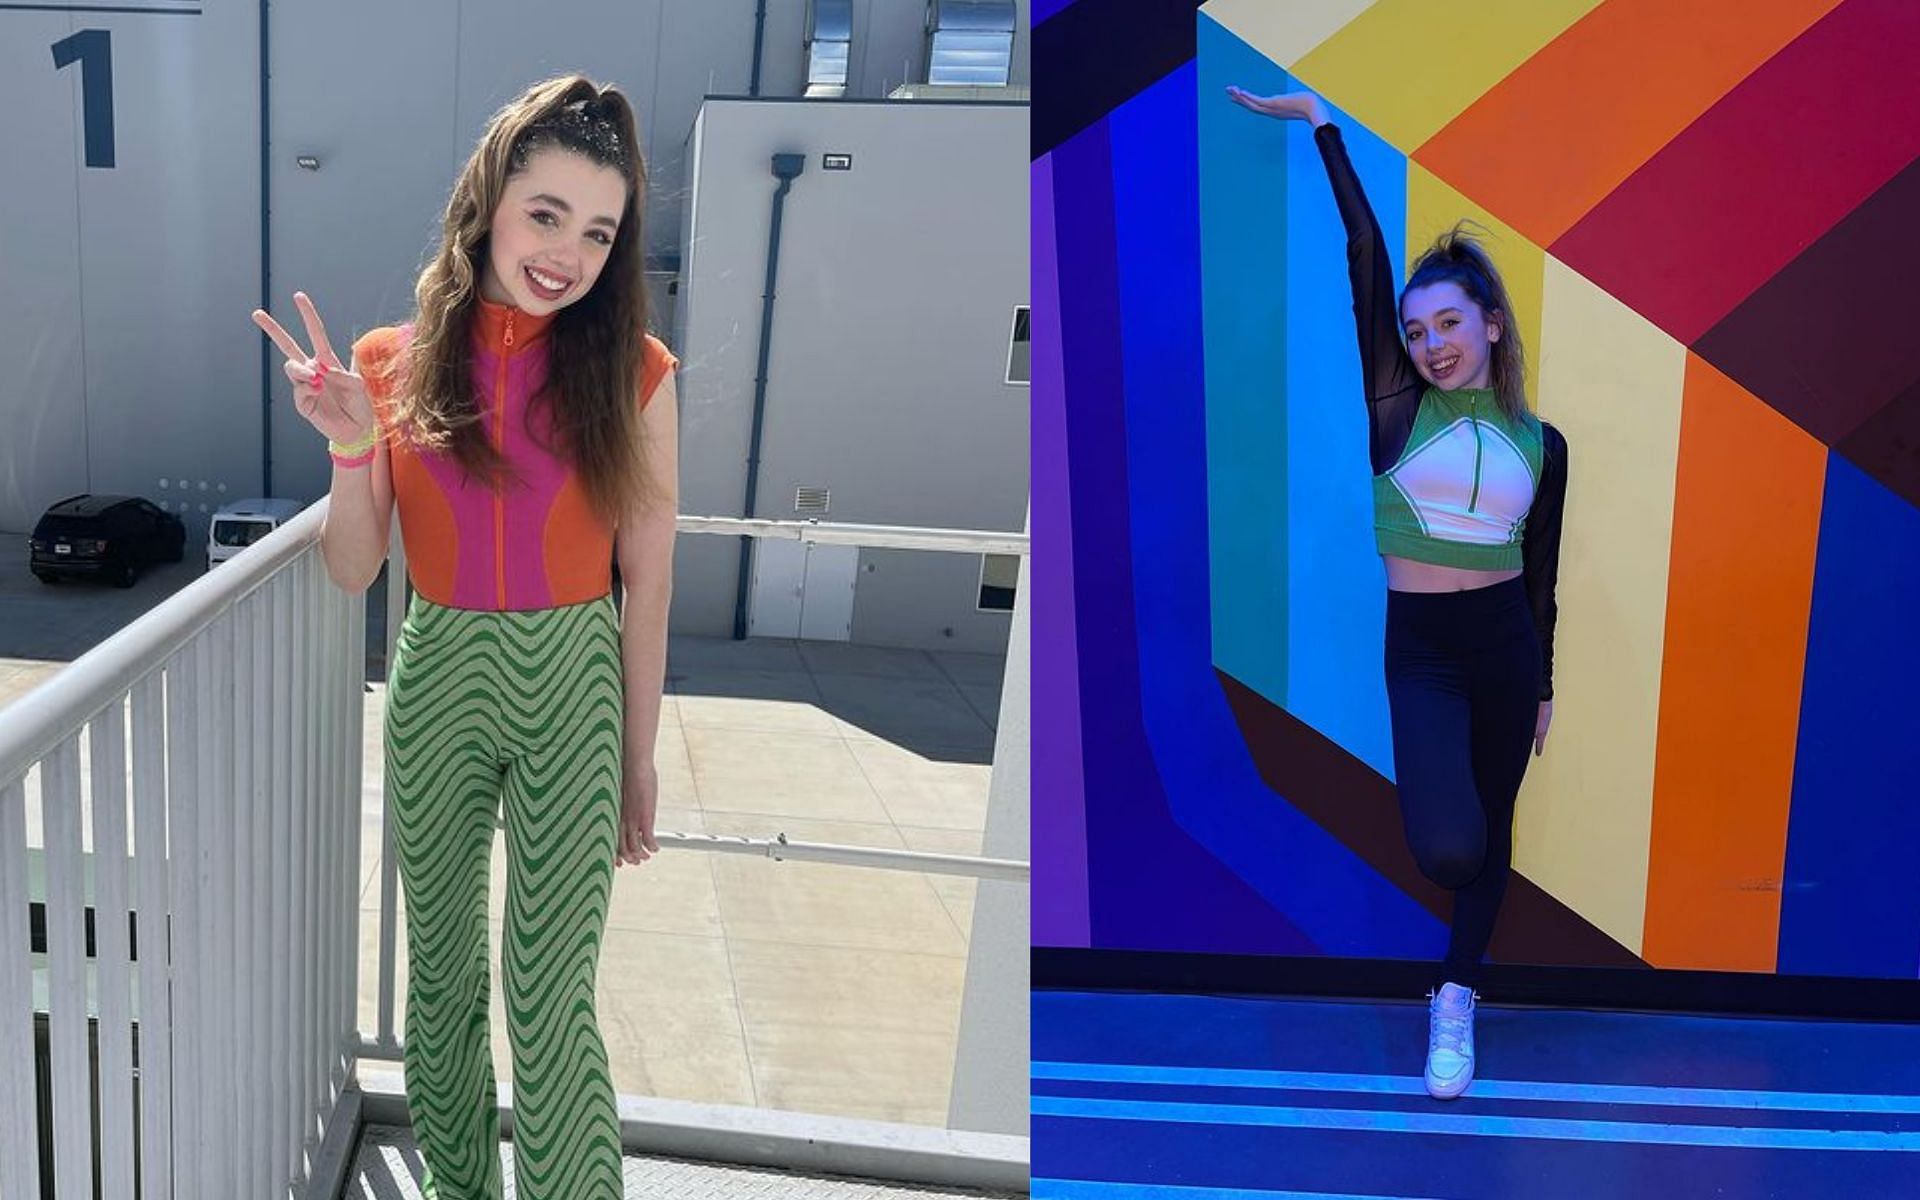 Lily Goehring wins the Dancing with Myself Week 4 episode (Images via lilykatexo/ Instagram)